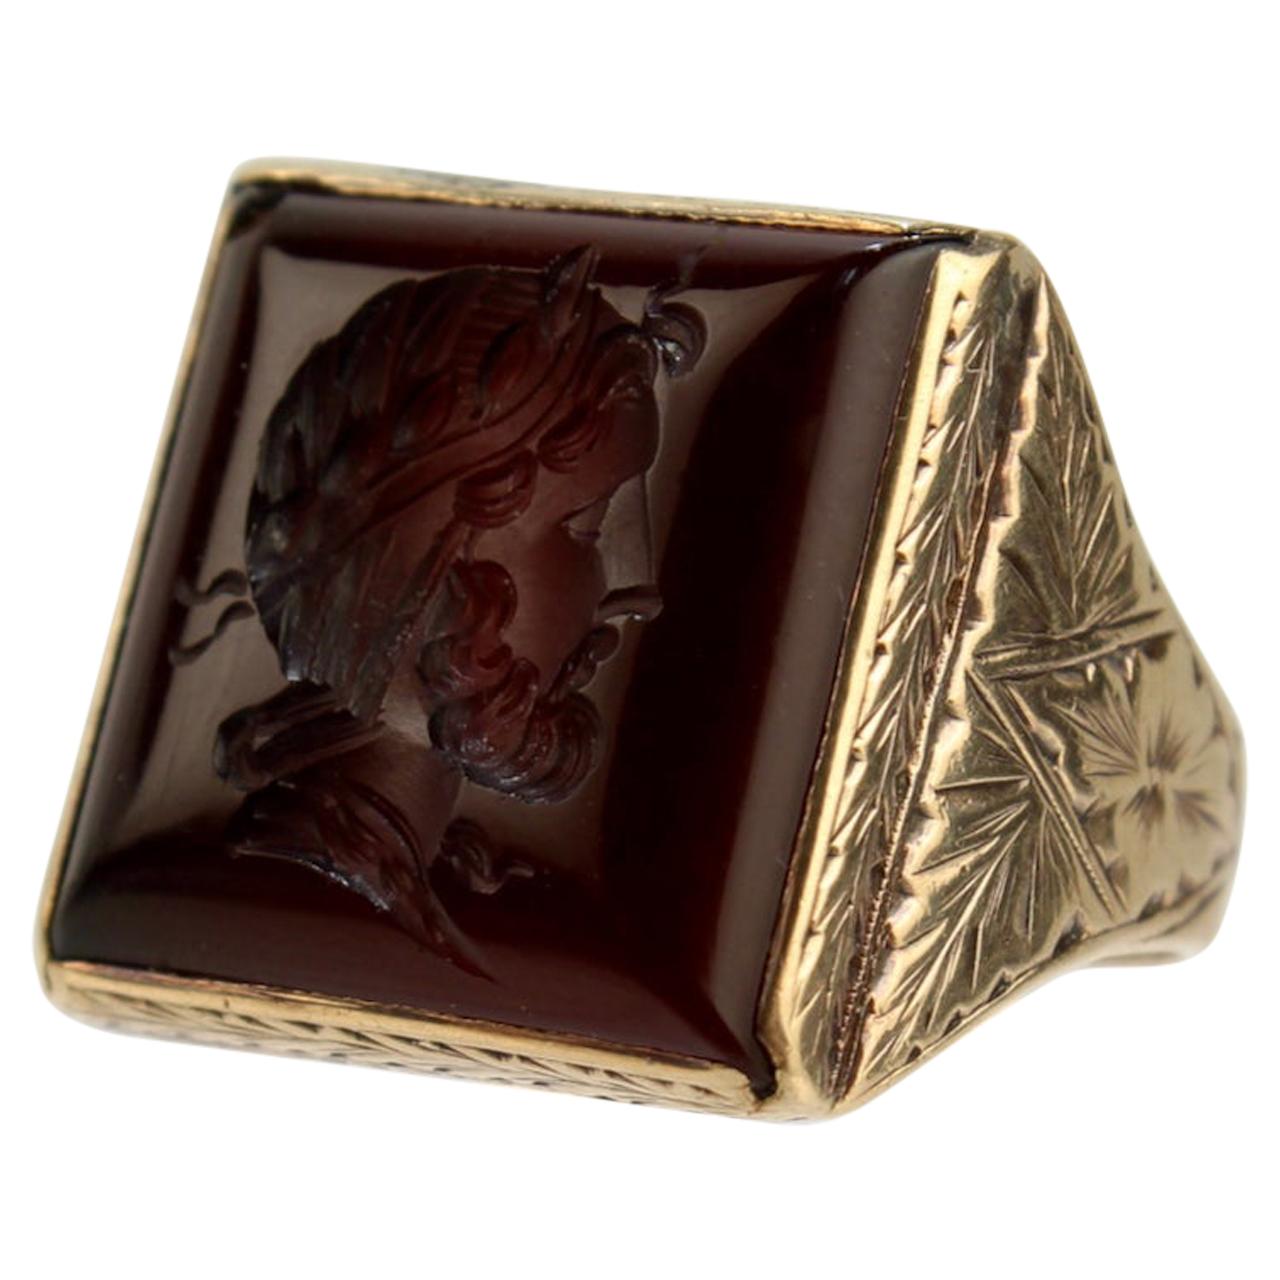 14 Karat Gold Carved Carnelian Intaglio Signet Ring with a Roman Bust